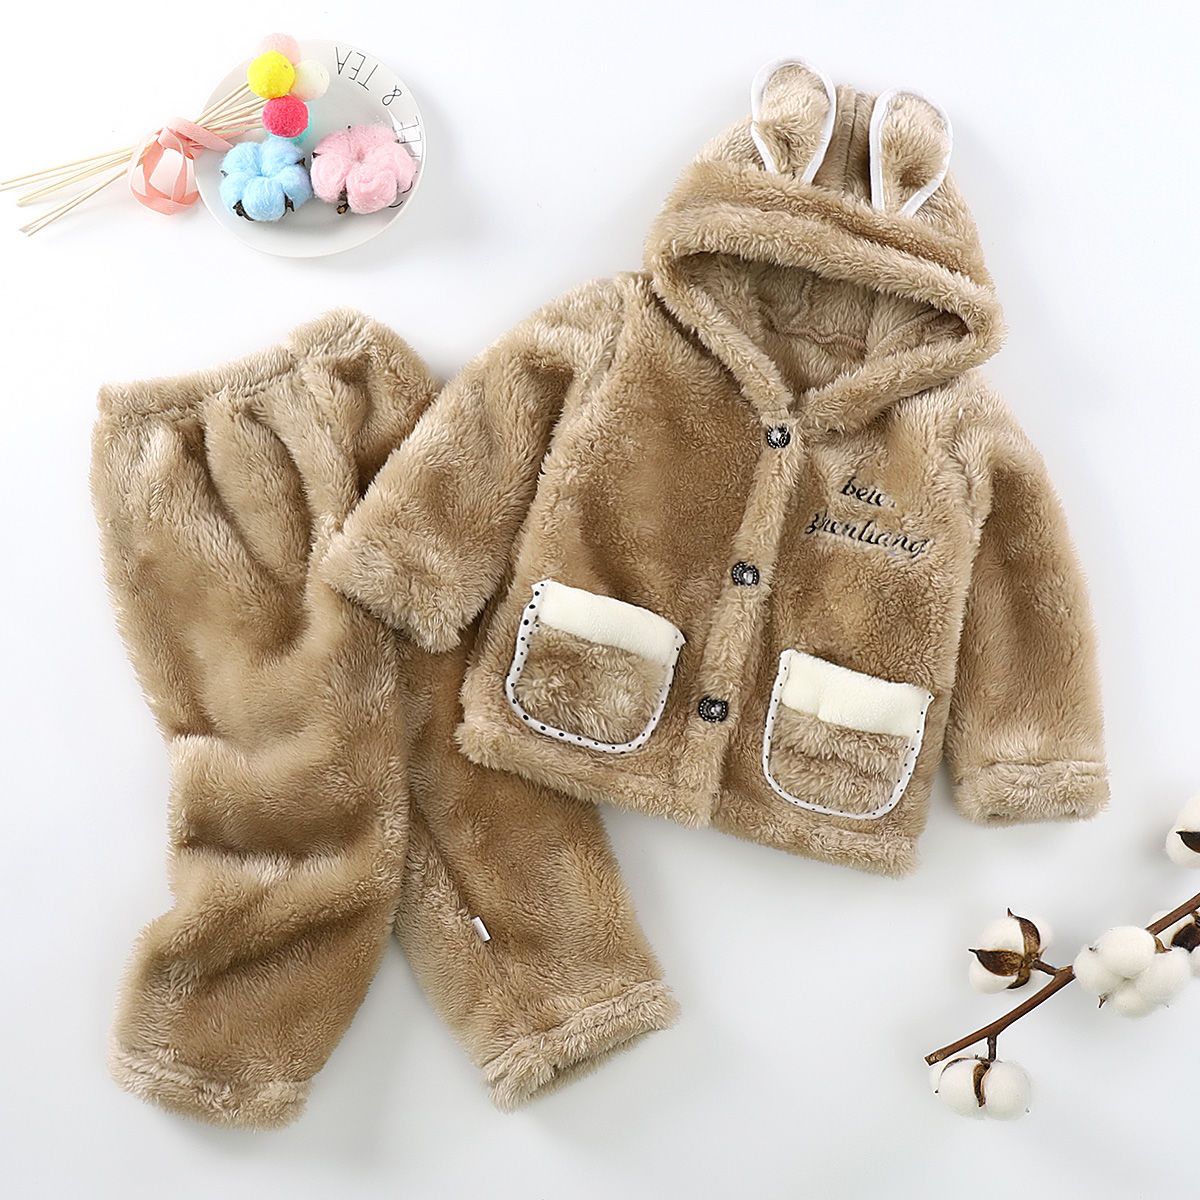 2021 new children's foreign style pajamas suit male and female baby small, medium and big children cute hooded spring and autumn models can be worn outside